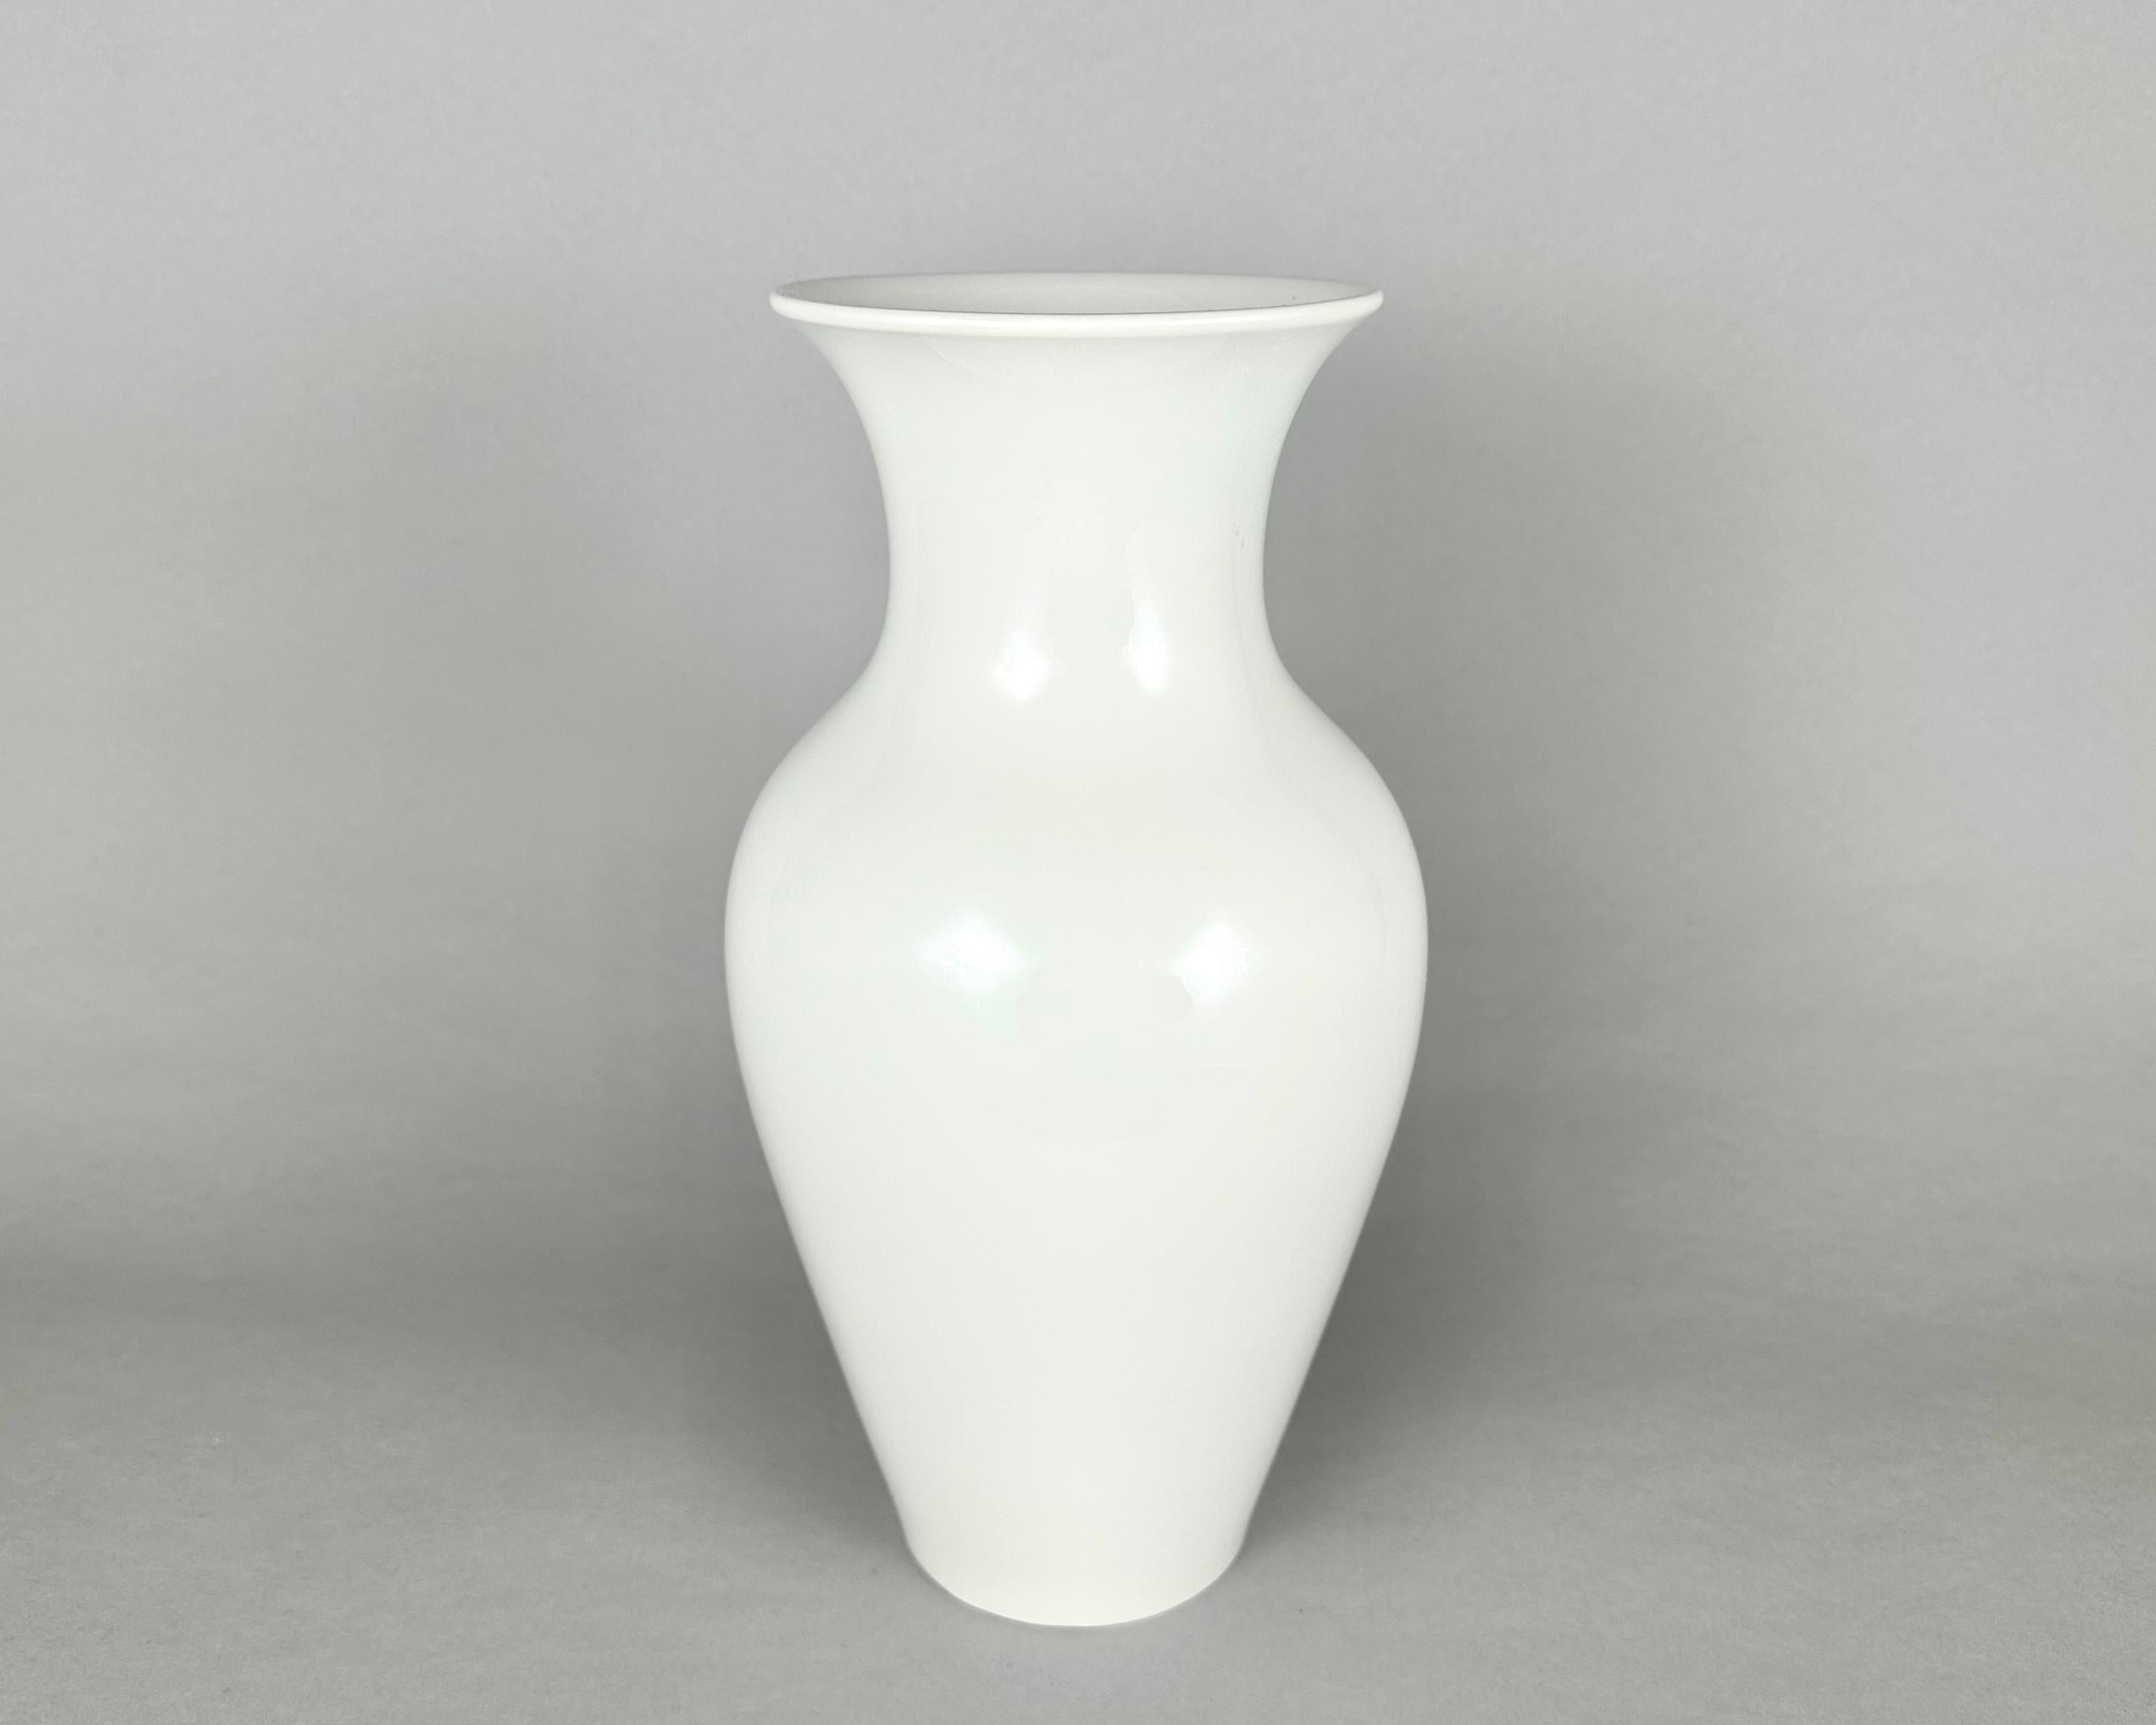 A large porcelain vase is a stylish decorative element for any interior.

A true example of grace and elegant style from the best German craftsmen of the KPM manufactory.

Suitable for decorating various rooms, such as bedroom, living room or